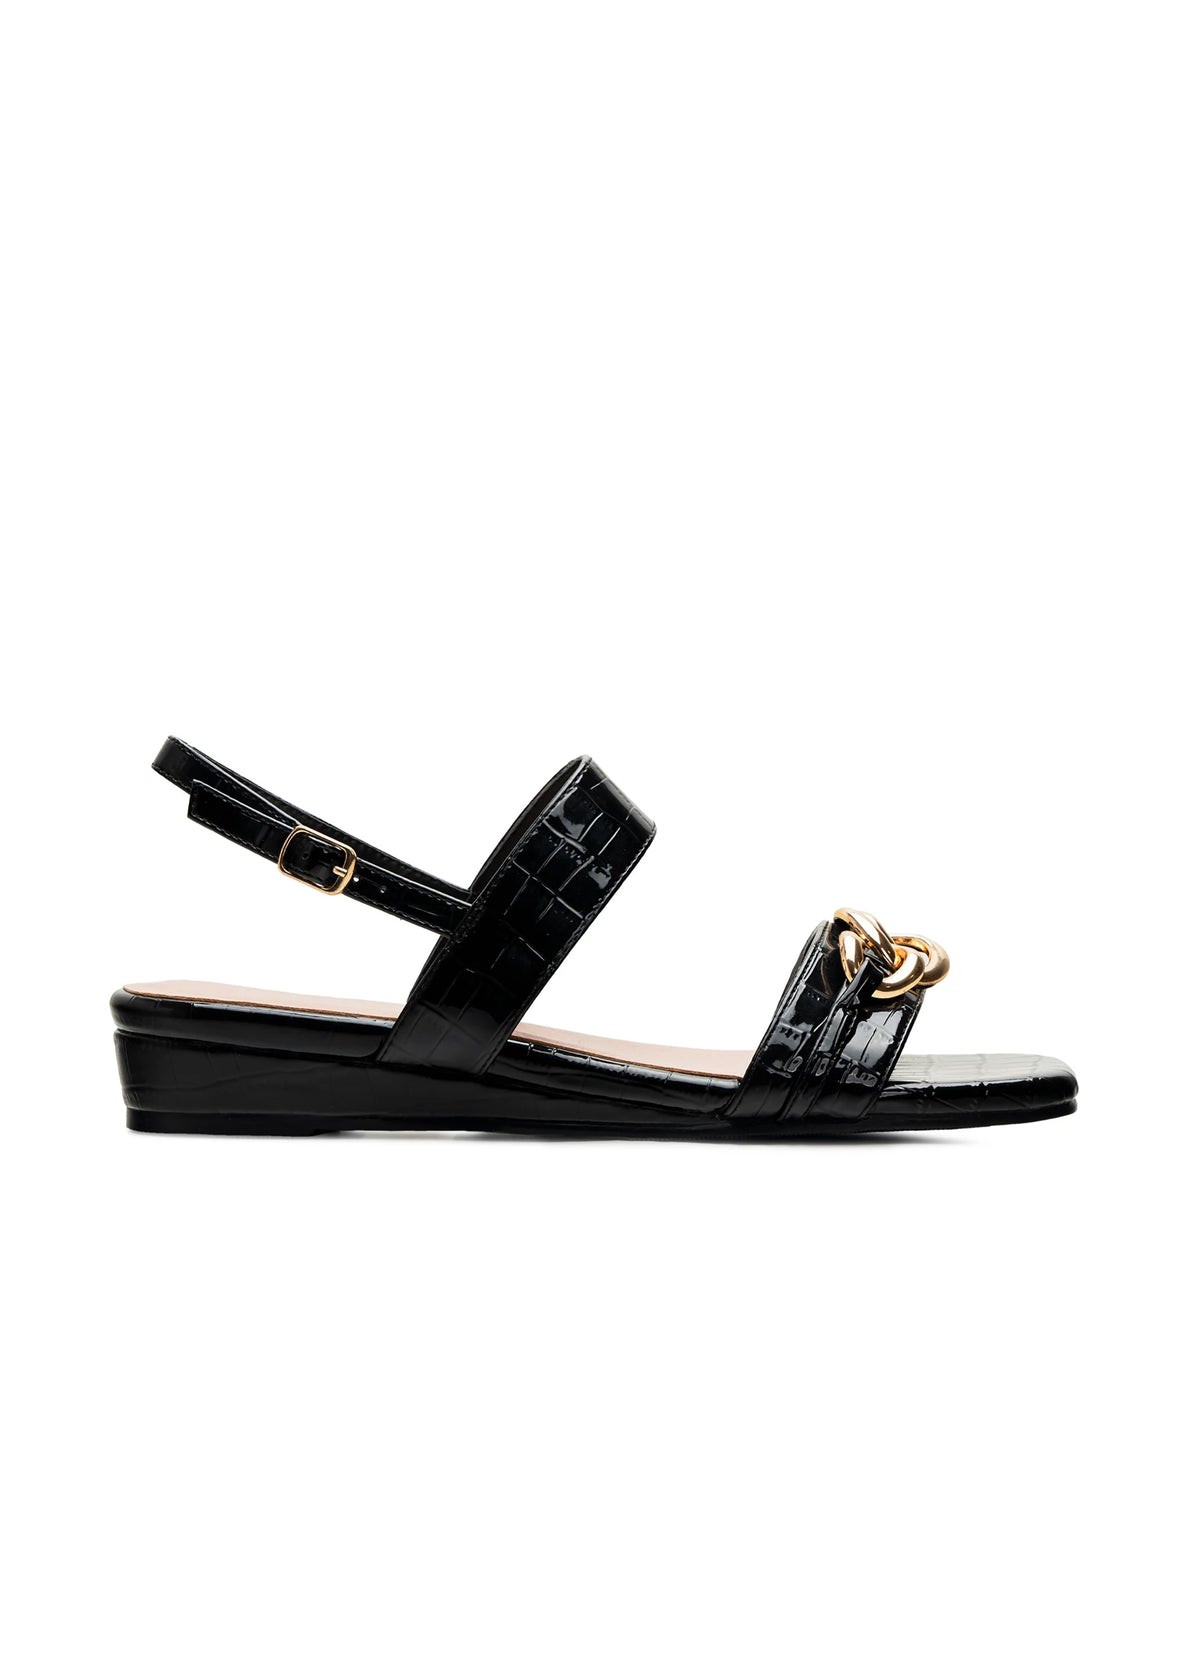 Sandals with a low wedge heel - black